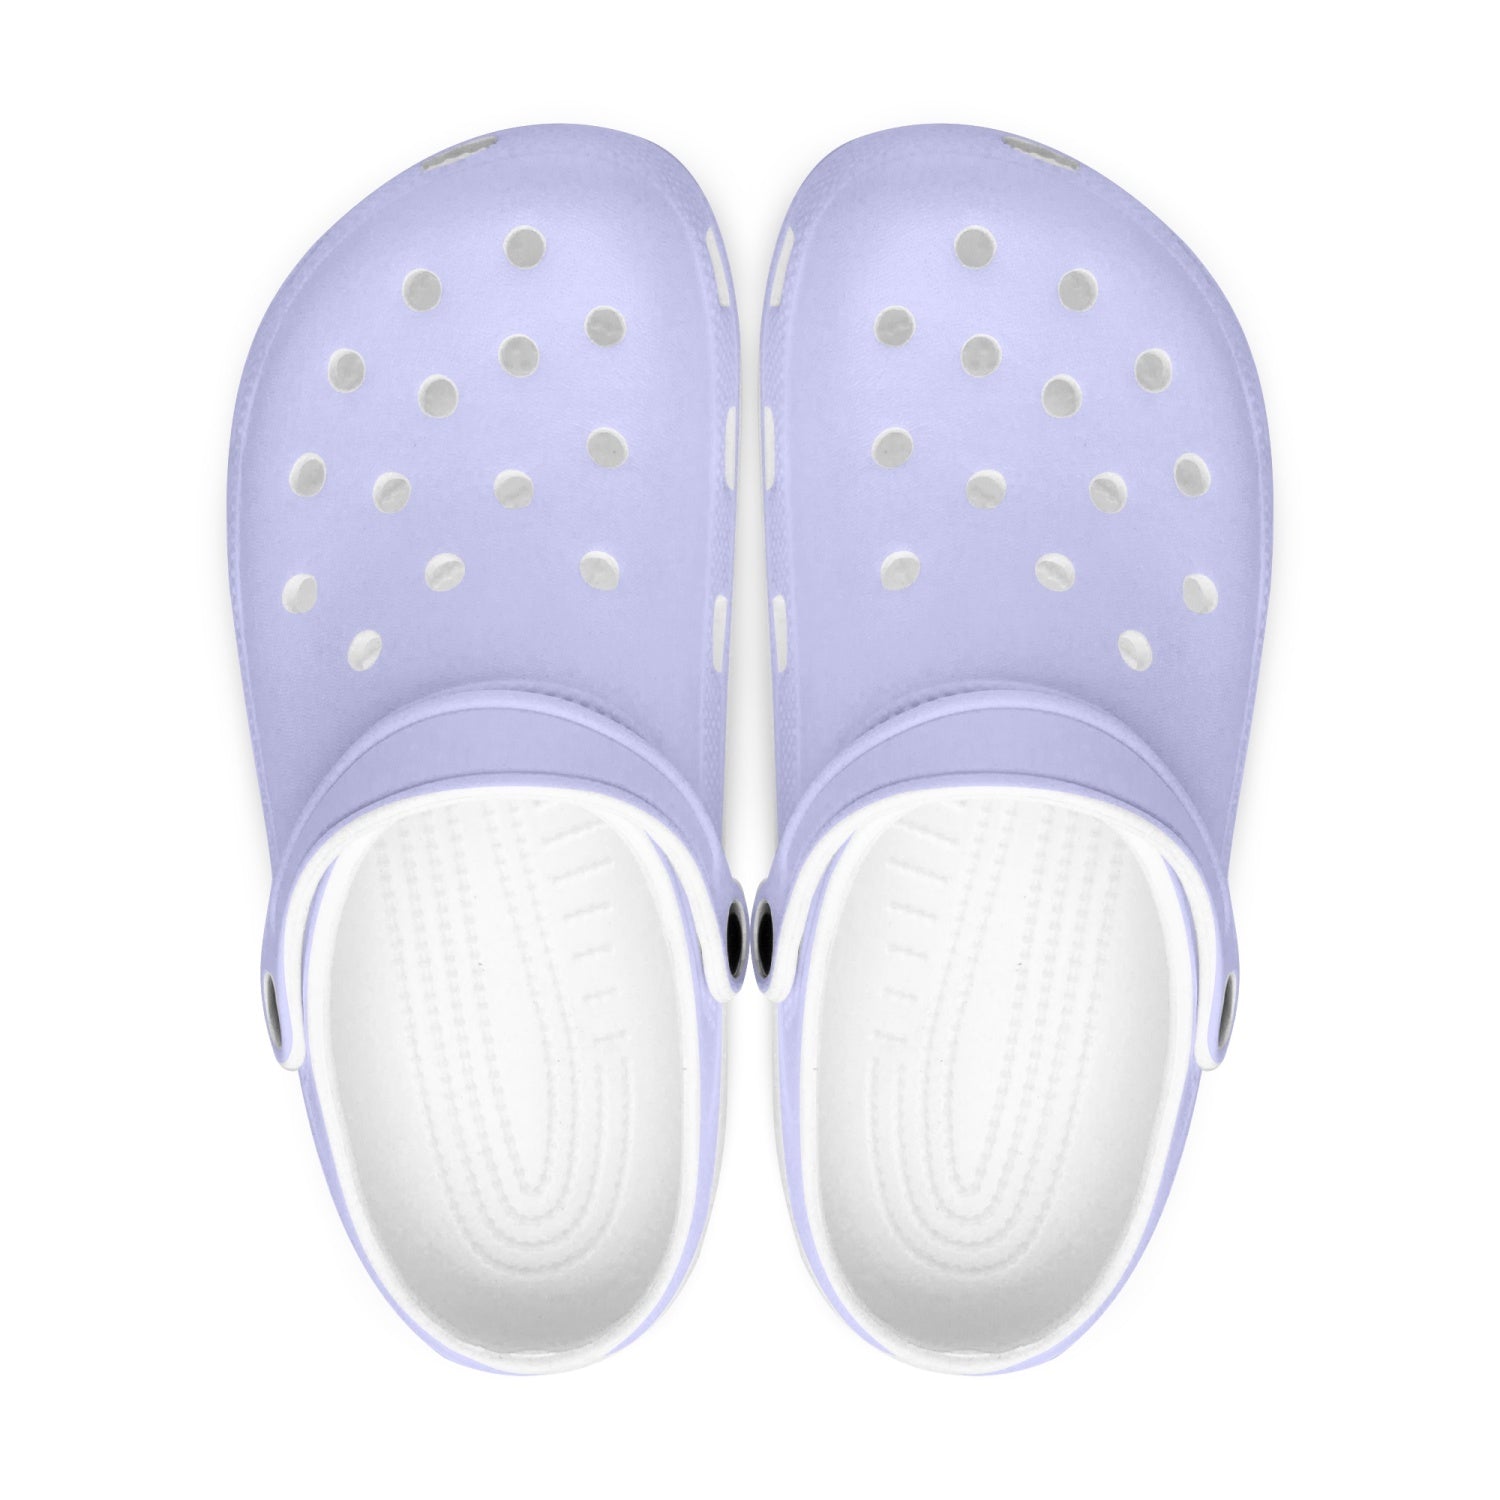 Pastel Purple Color Unisex Clogs, Best Solid Purple Color Classic Solid Color Printed Adult's Lightweight Anti-Slip Unisex Extra Comfy Soft Breathable Supportive Clogs Flip Flop Pool Water Beach Slippers Sandals Shoes For Men or Women, Men's US Size: 3.5-12, Women's US Size: 4-12